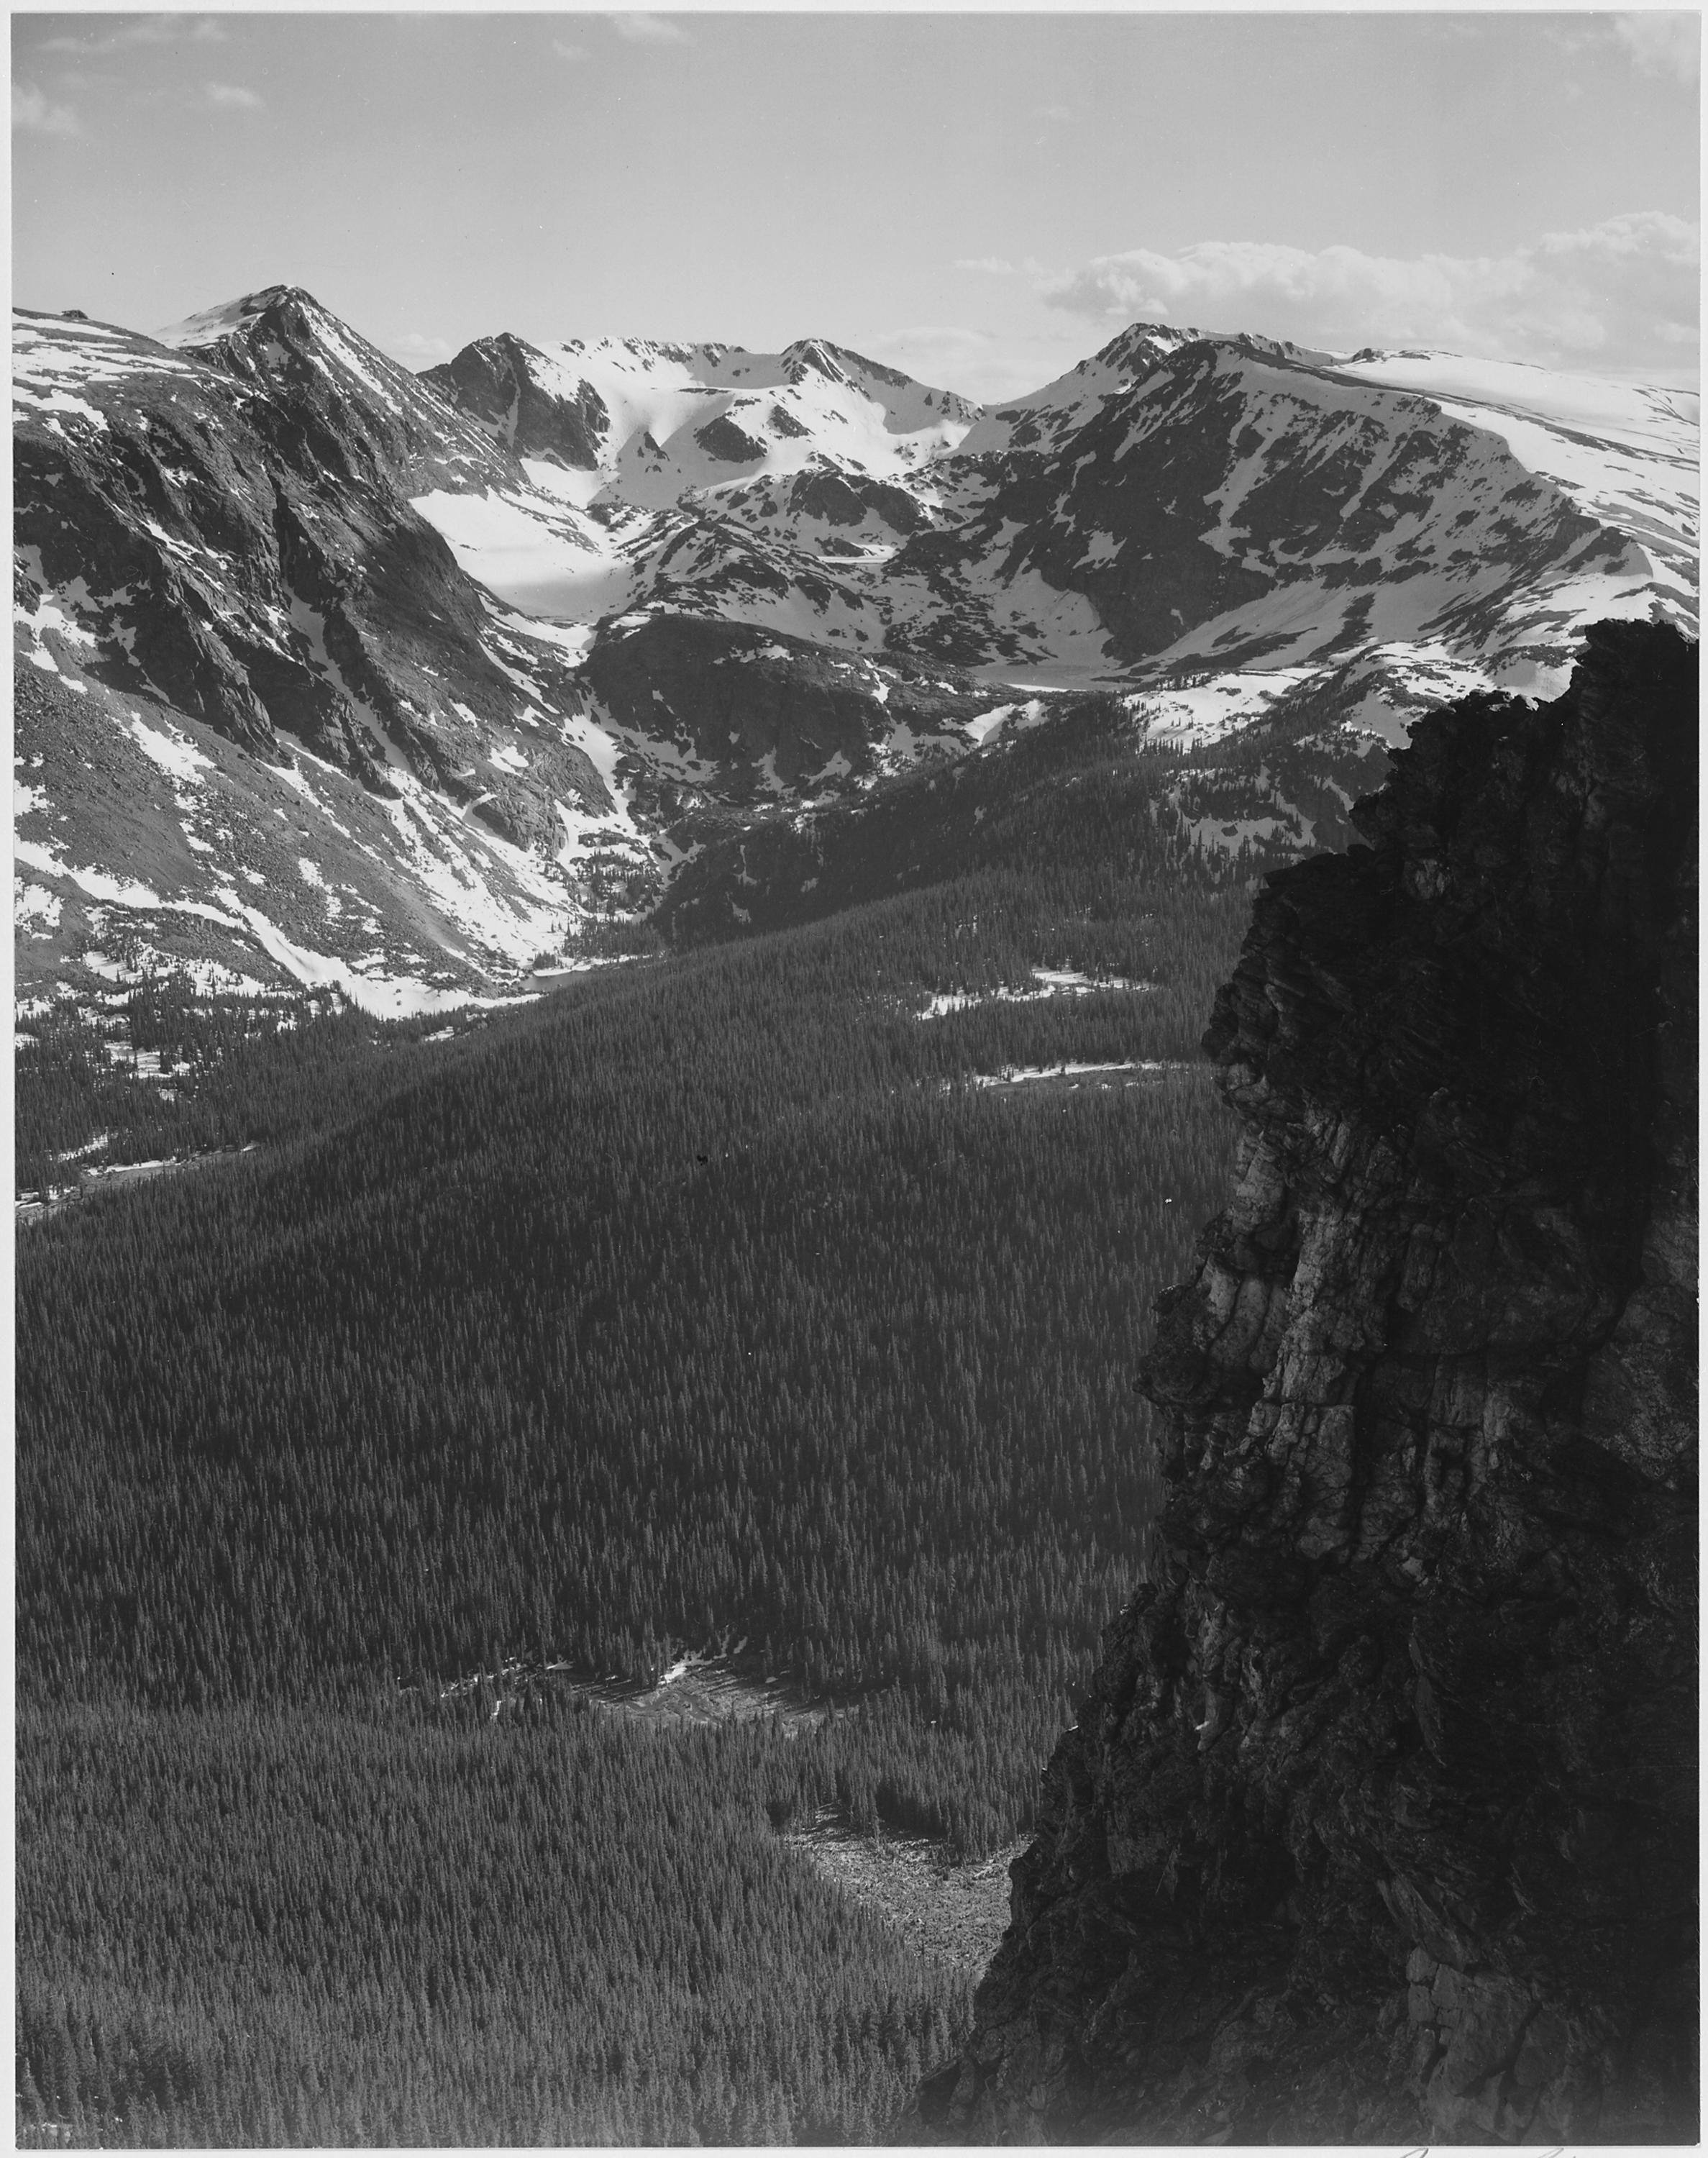 Ansel Adams - National Archives 79-AA-M06